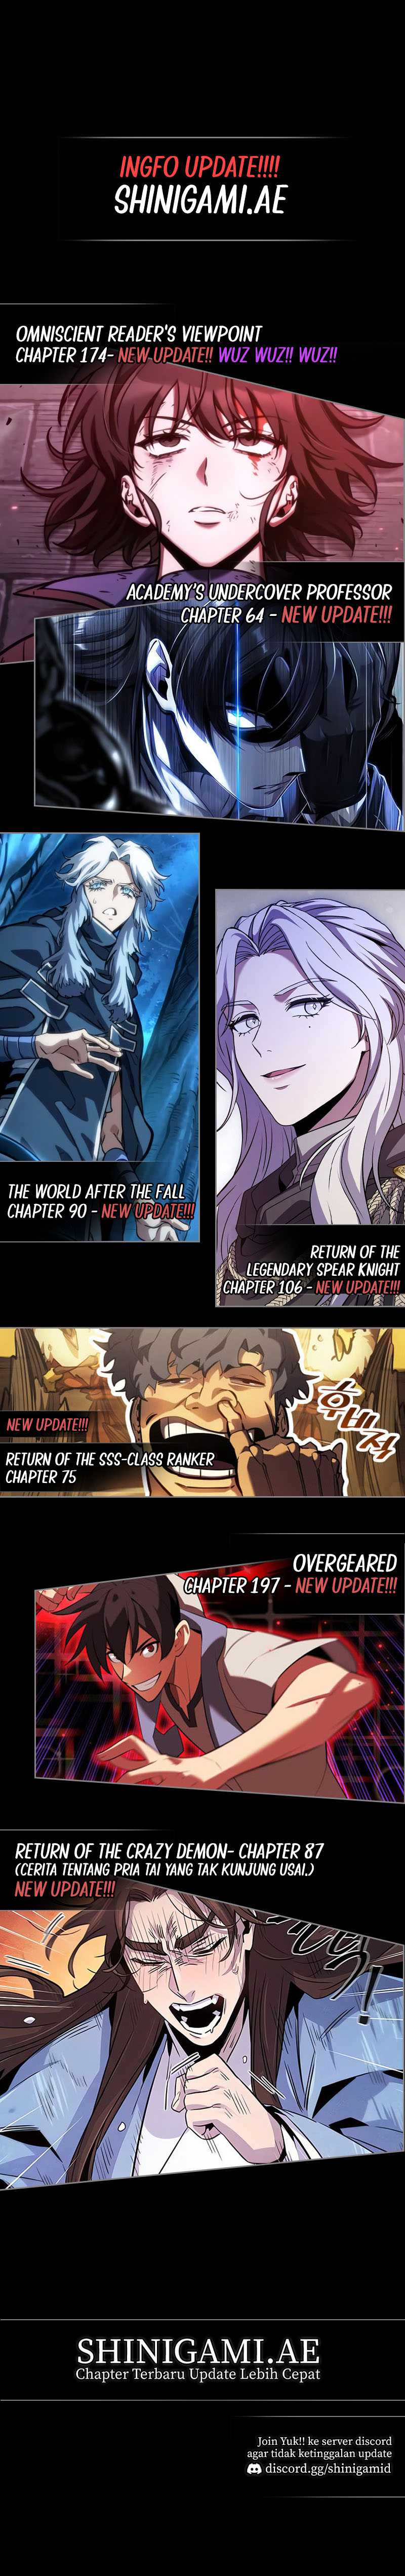 Revenge of the Iron-Blooded Sword Hound Chapter 42